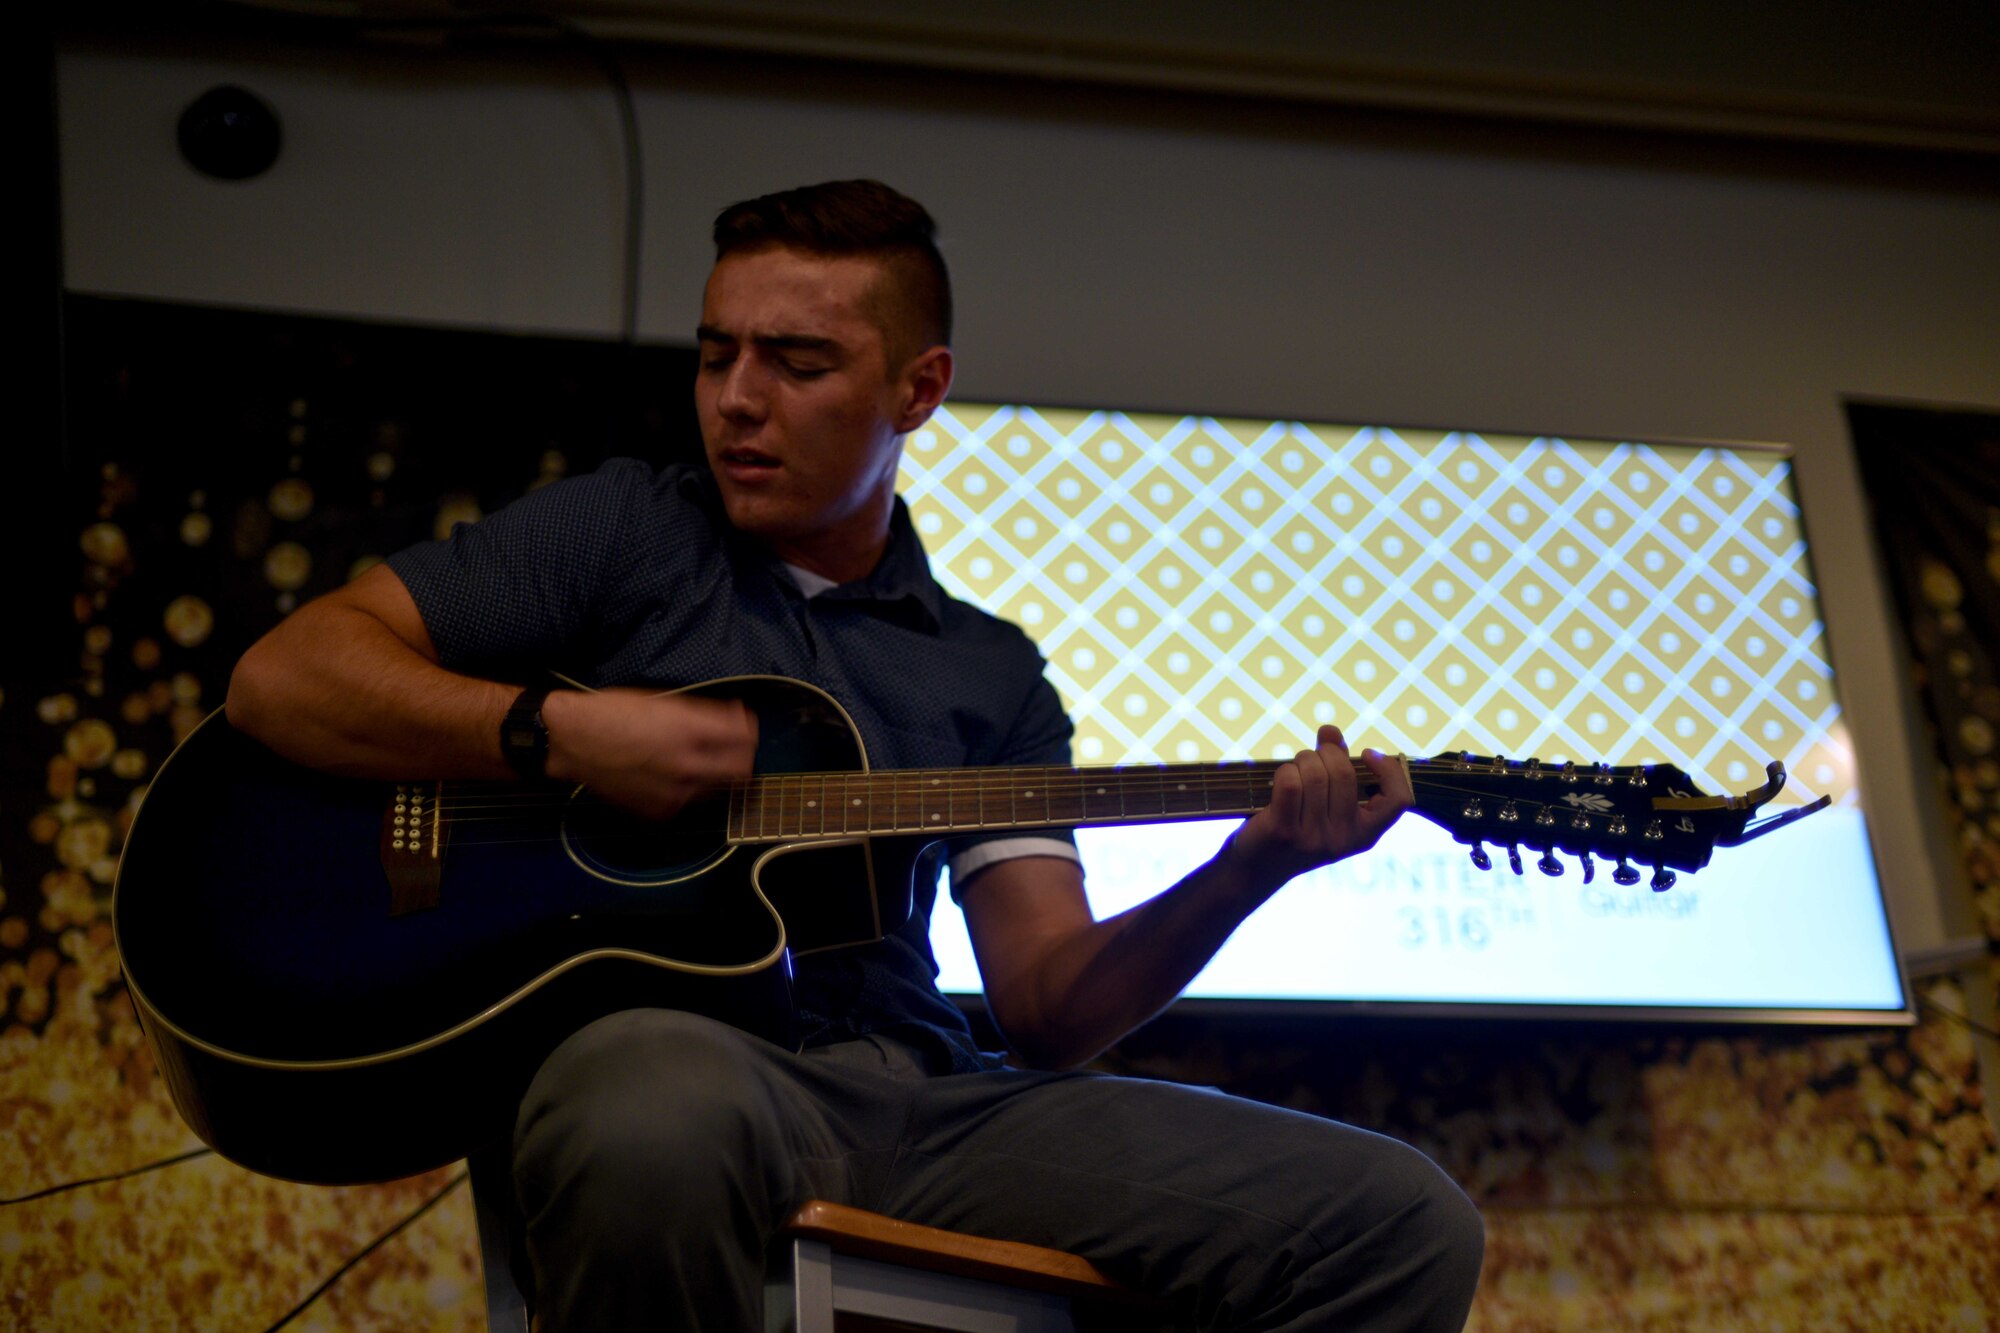 U.S. Air Force Airman 1st Class Dylan Hunter, 316th Training Squadron student, performs an original song during the semi-annual Goodfellow’s Got Talent show at the Crossroads Student Ministry Center on Goodfellow Air Force Base, Texas, July 13, 2018. Hunter won third place for his performance. (U.S. Air Force photo by Senior Airman Randall Moose/Released)